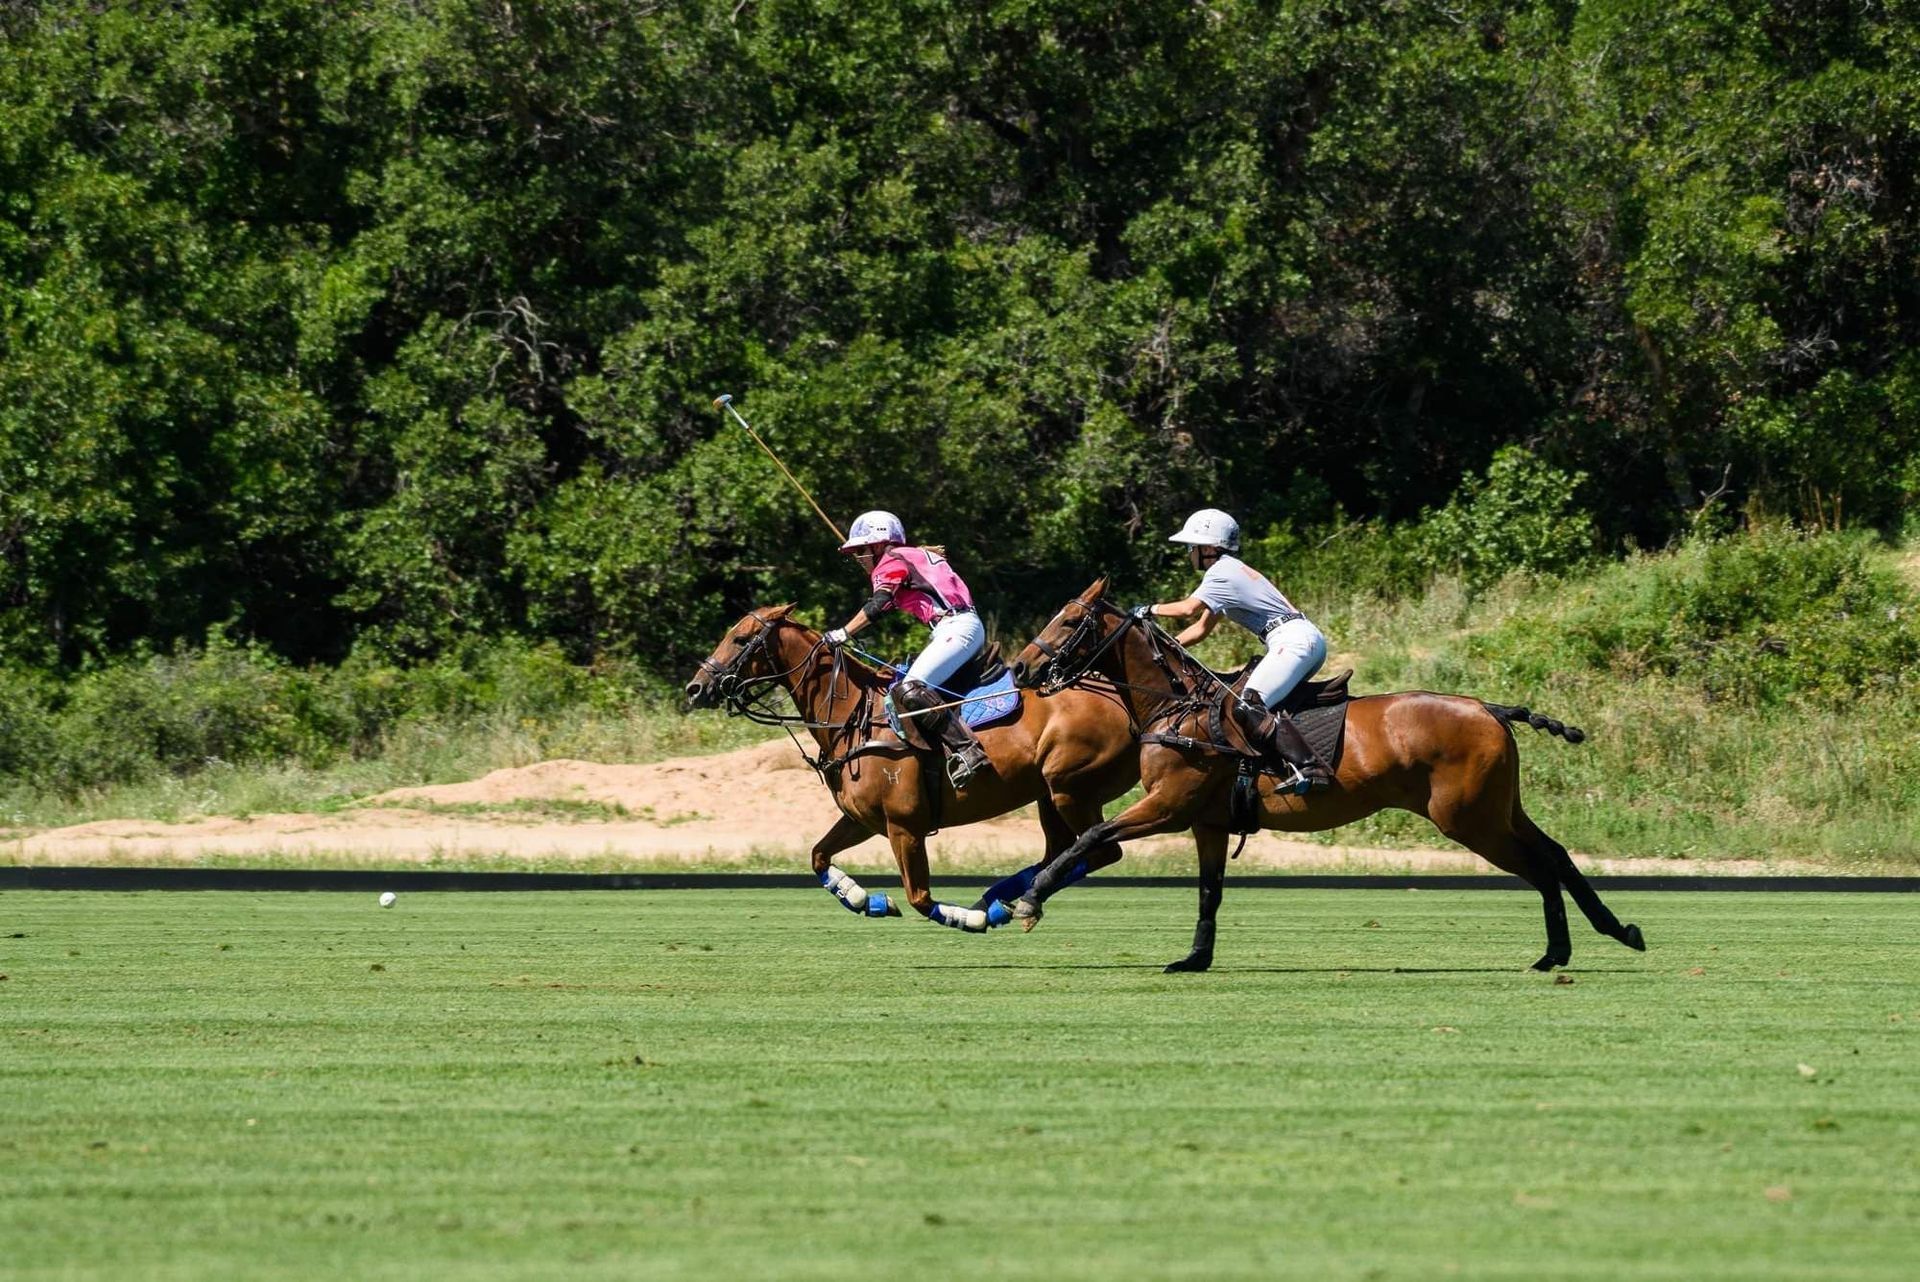 Two people are riding horses on a polo field.